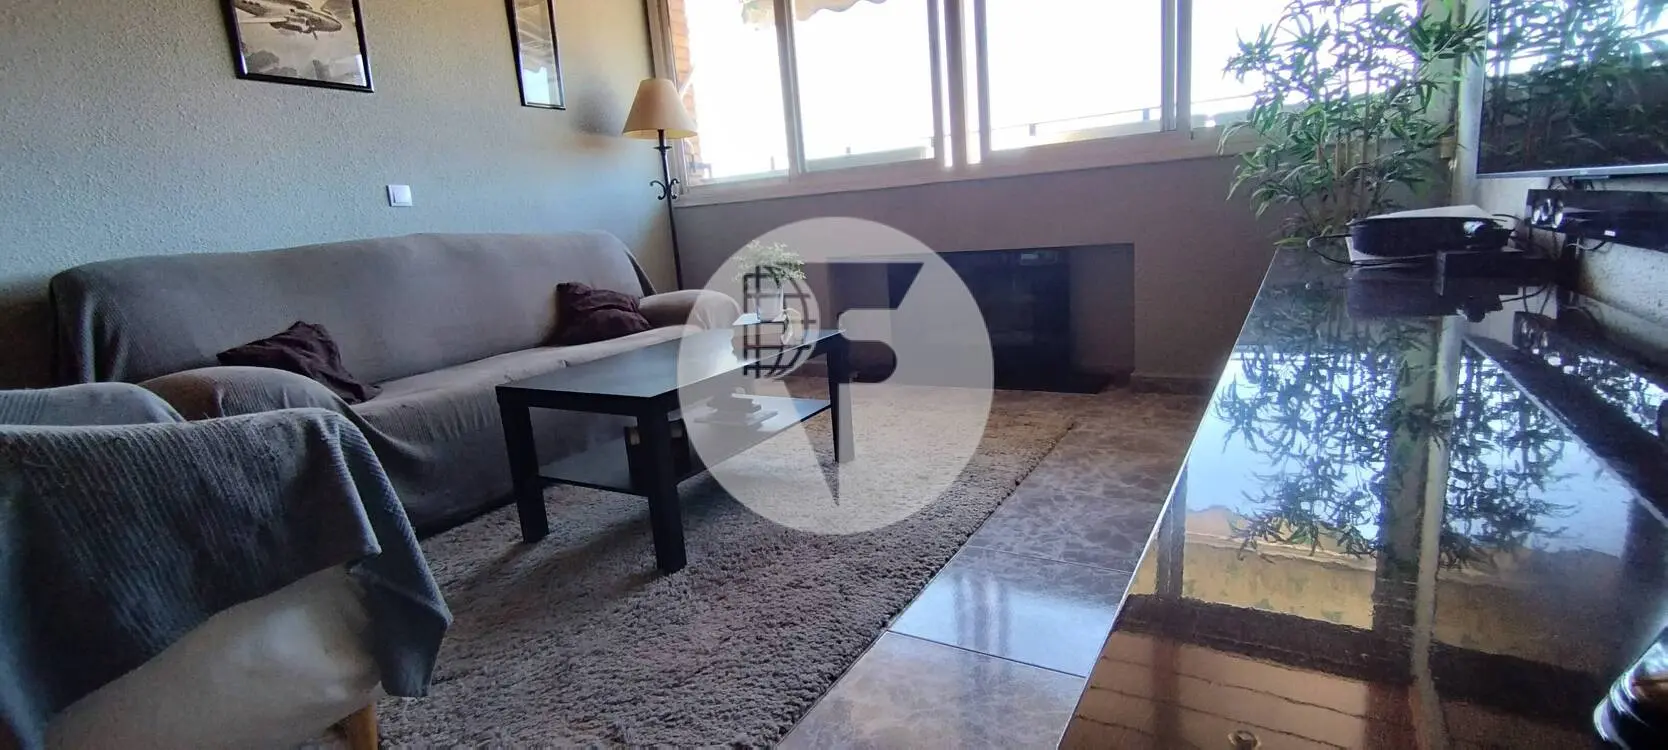 Charming 107m² flat with views and parking in Santa Eulalia de Ronçana 3